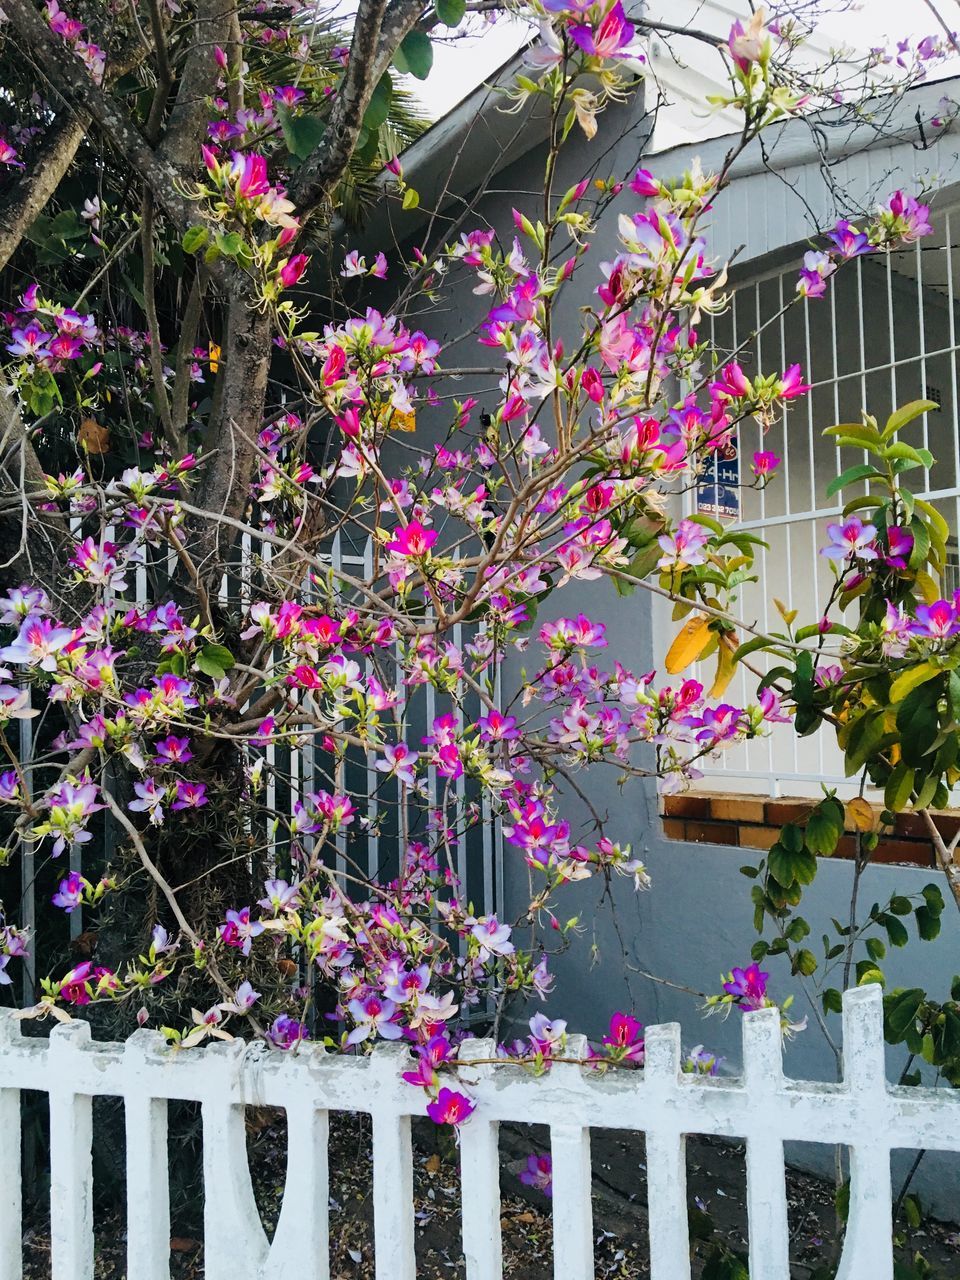 flower, growth, fragility, beauty in nature, plant, nature, outdoors, freshness, no people, day, pink color, branch, hanging, blooming, springtime, building exterior, architecture, tree, flower head, close-up